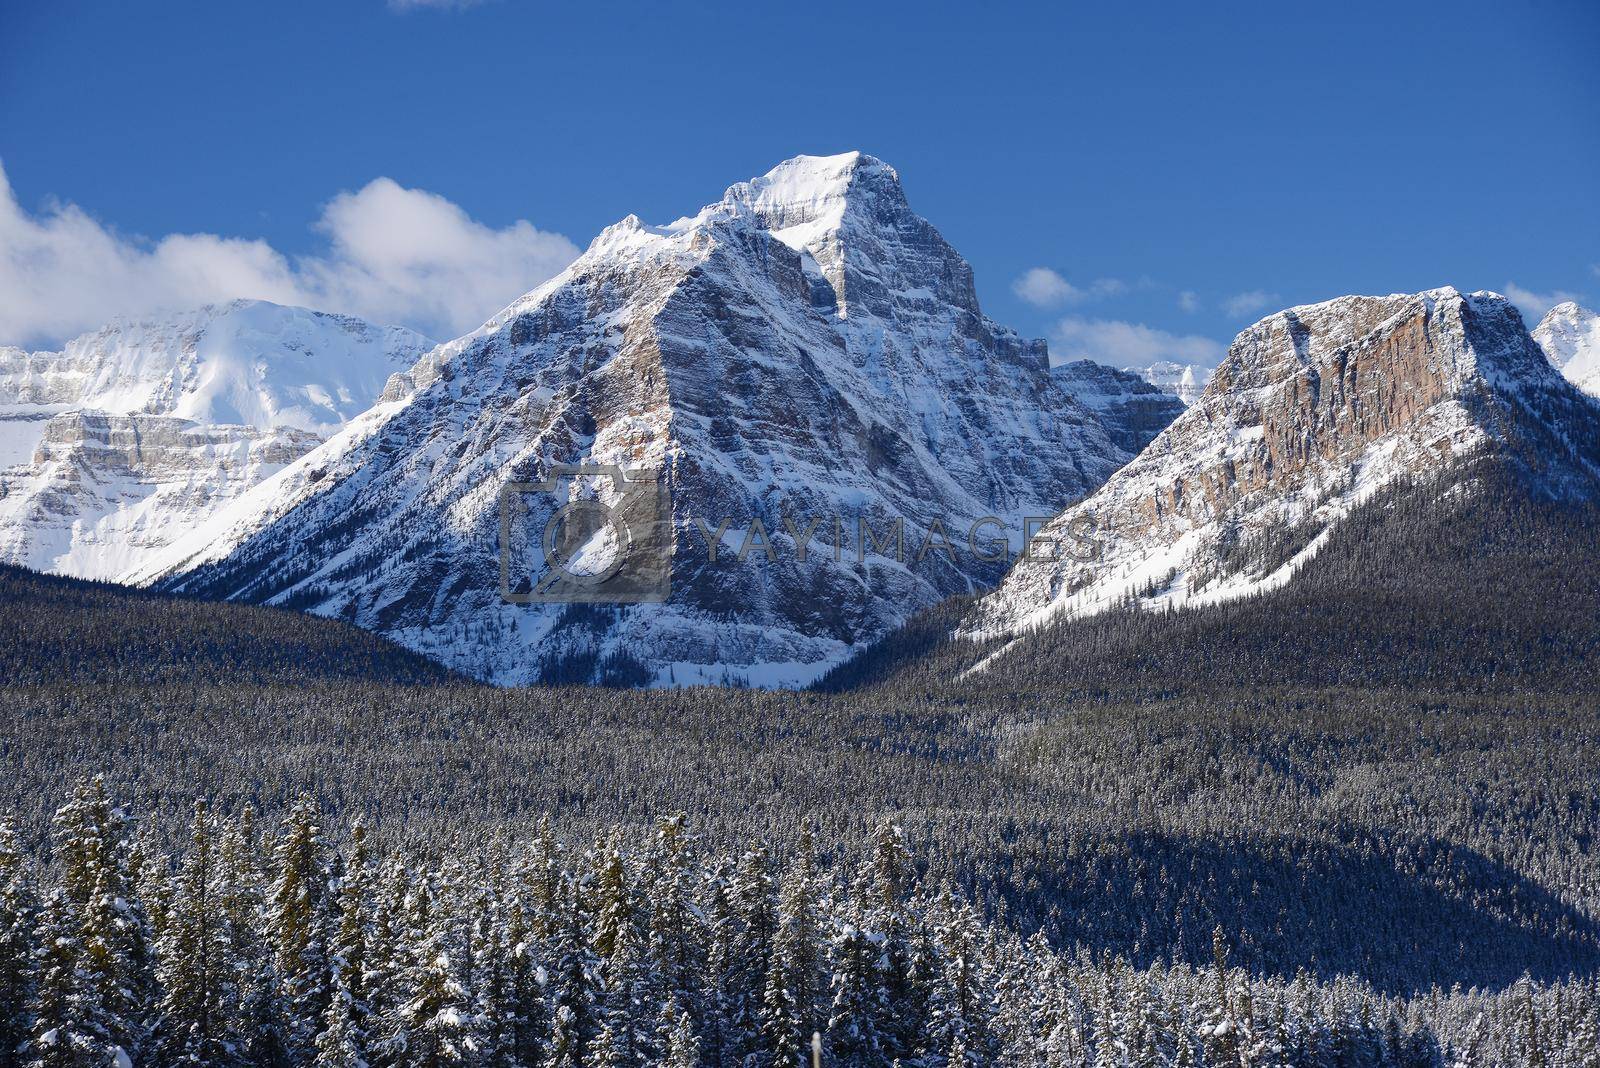 Royalty free image of winter canadian rockies by porbital